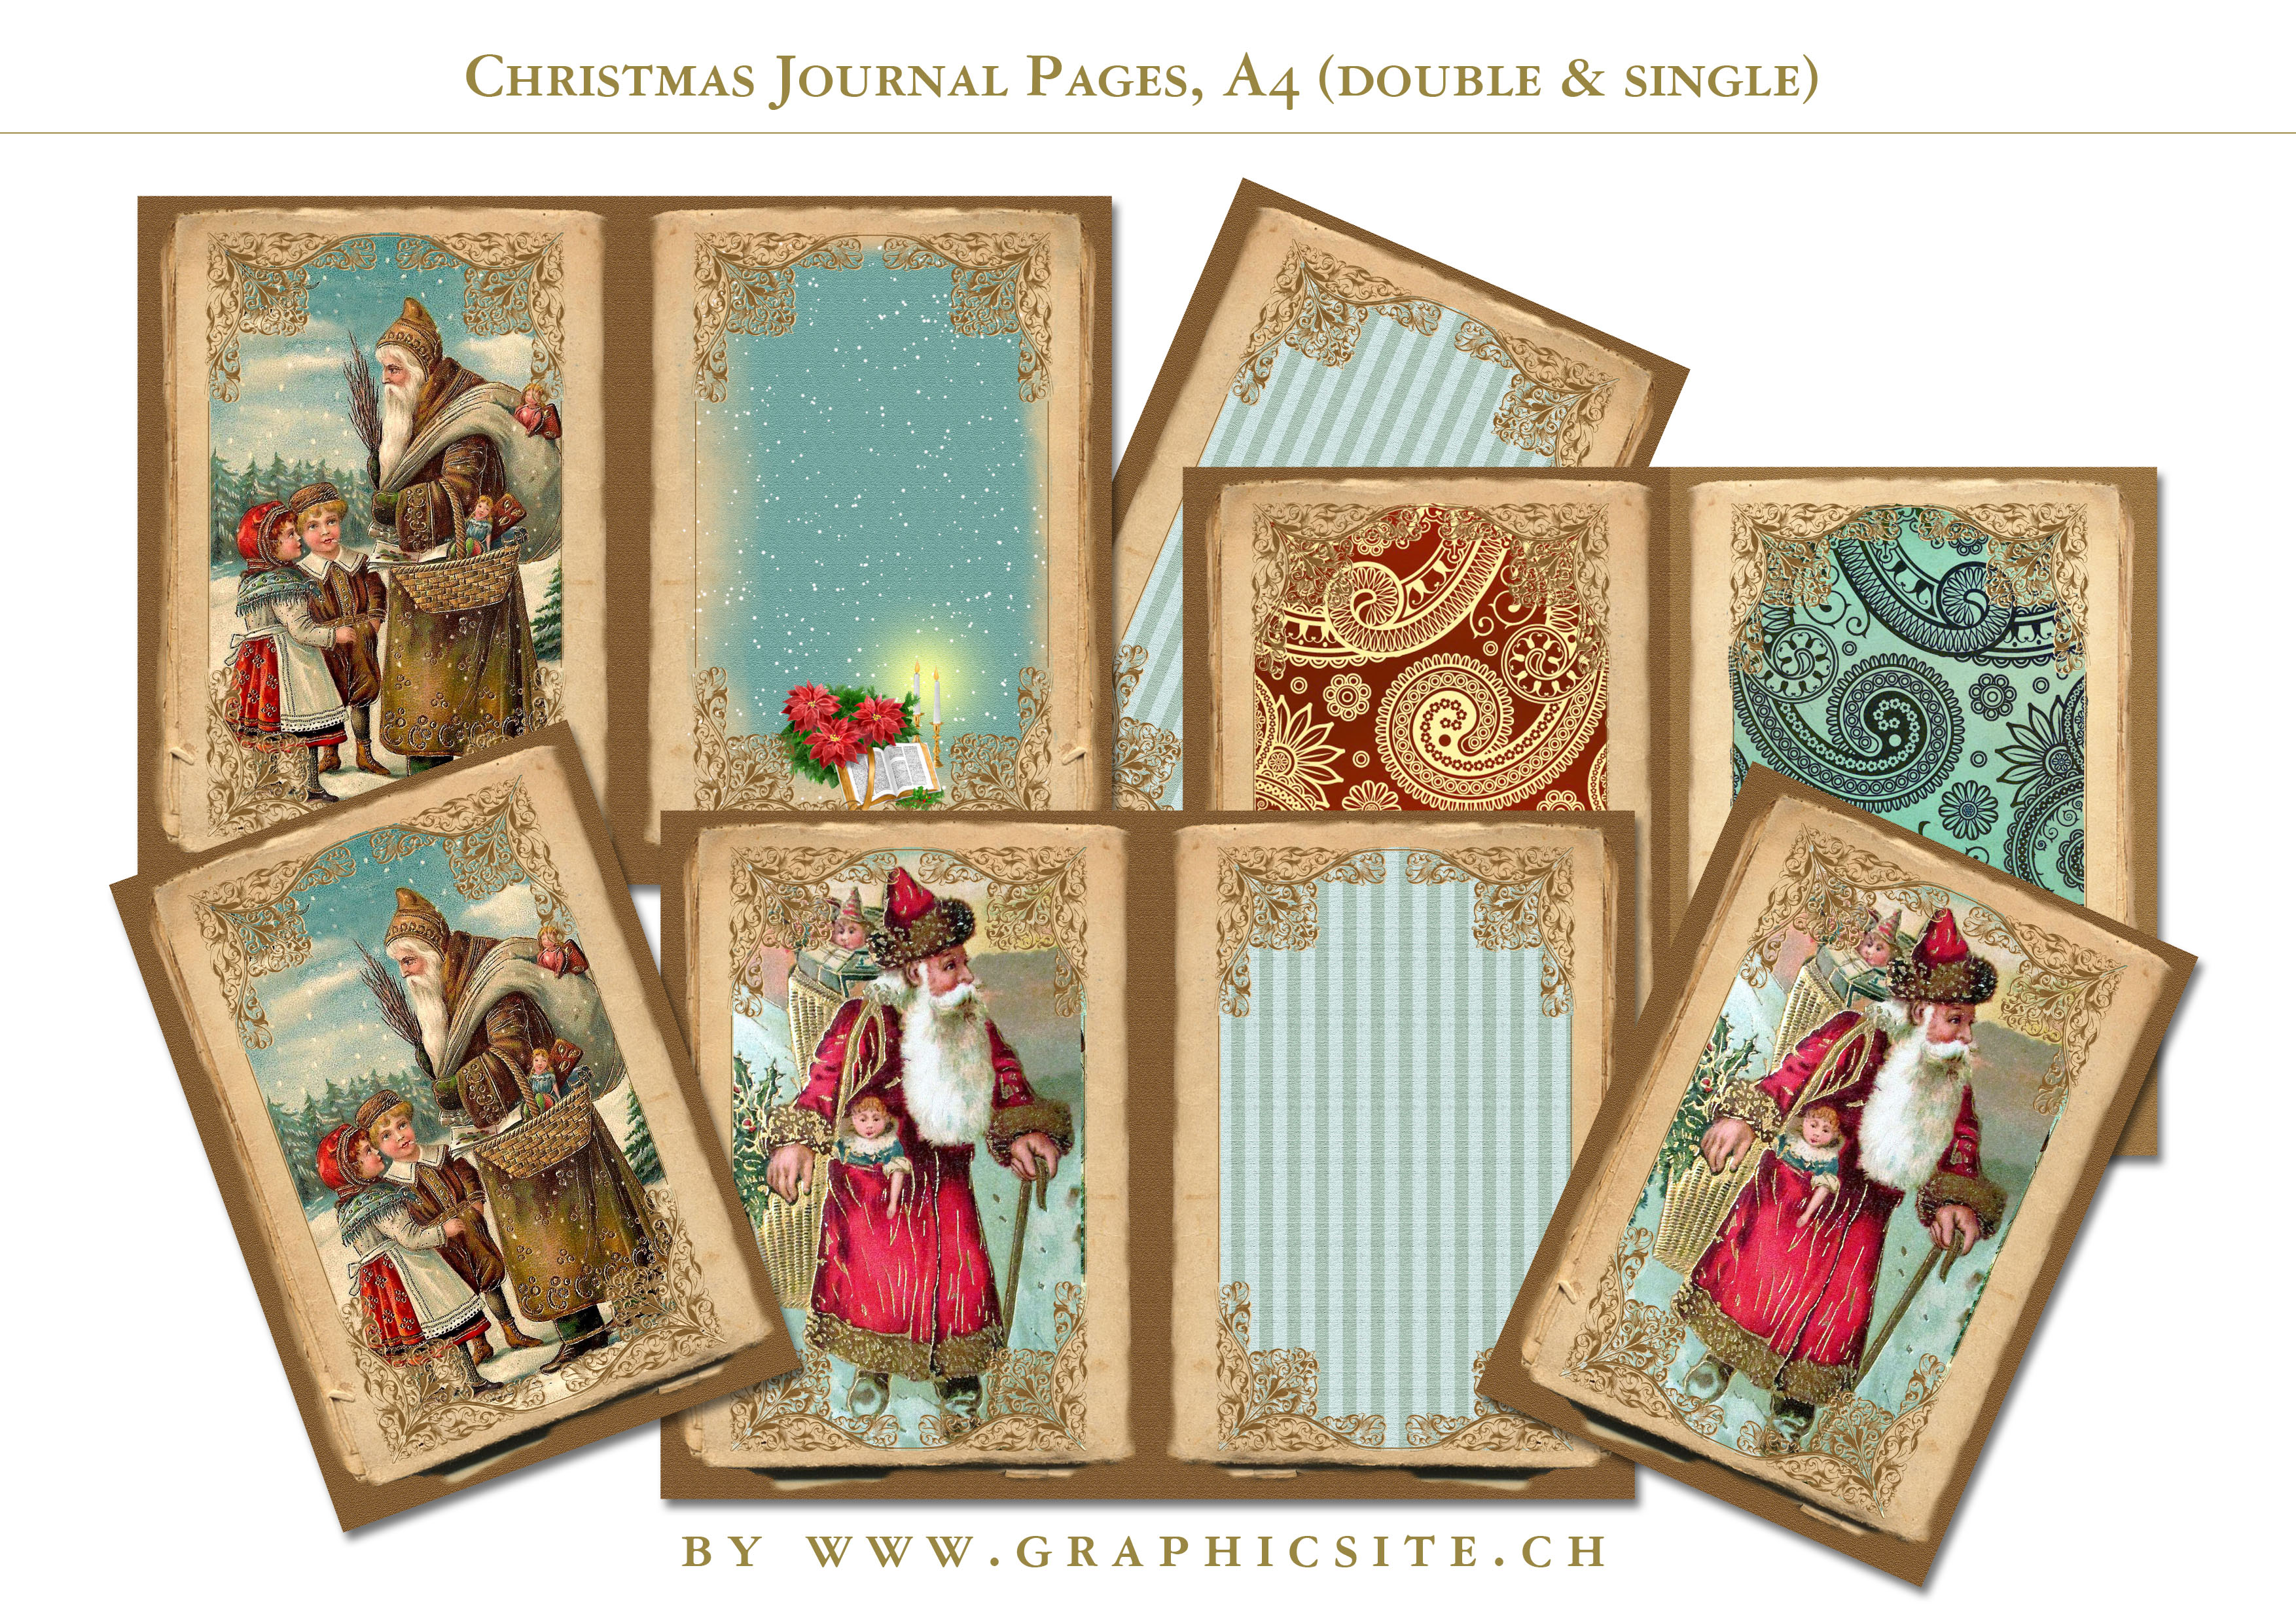 Journal Pages, A4, Cardmaking, Journaling, Christmas, Images, download, printables,